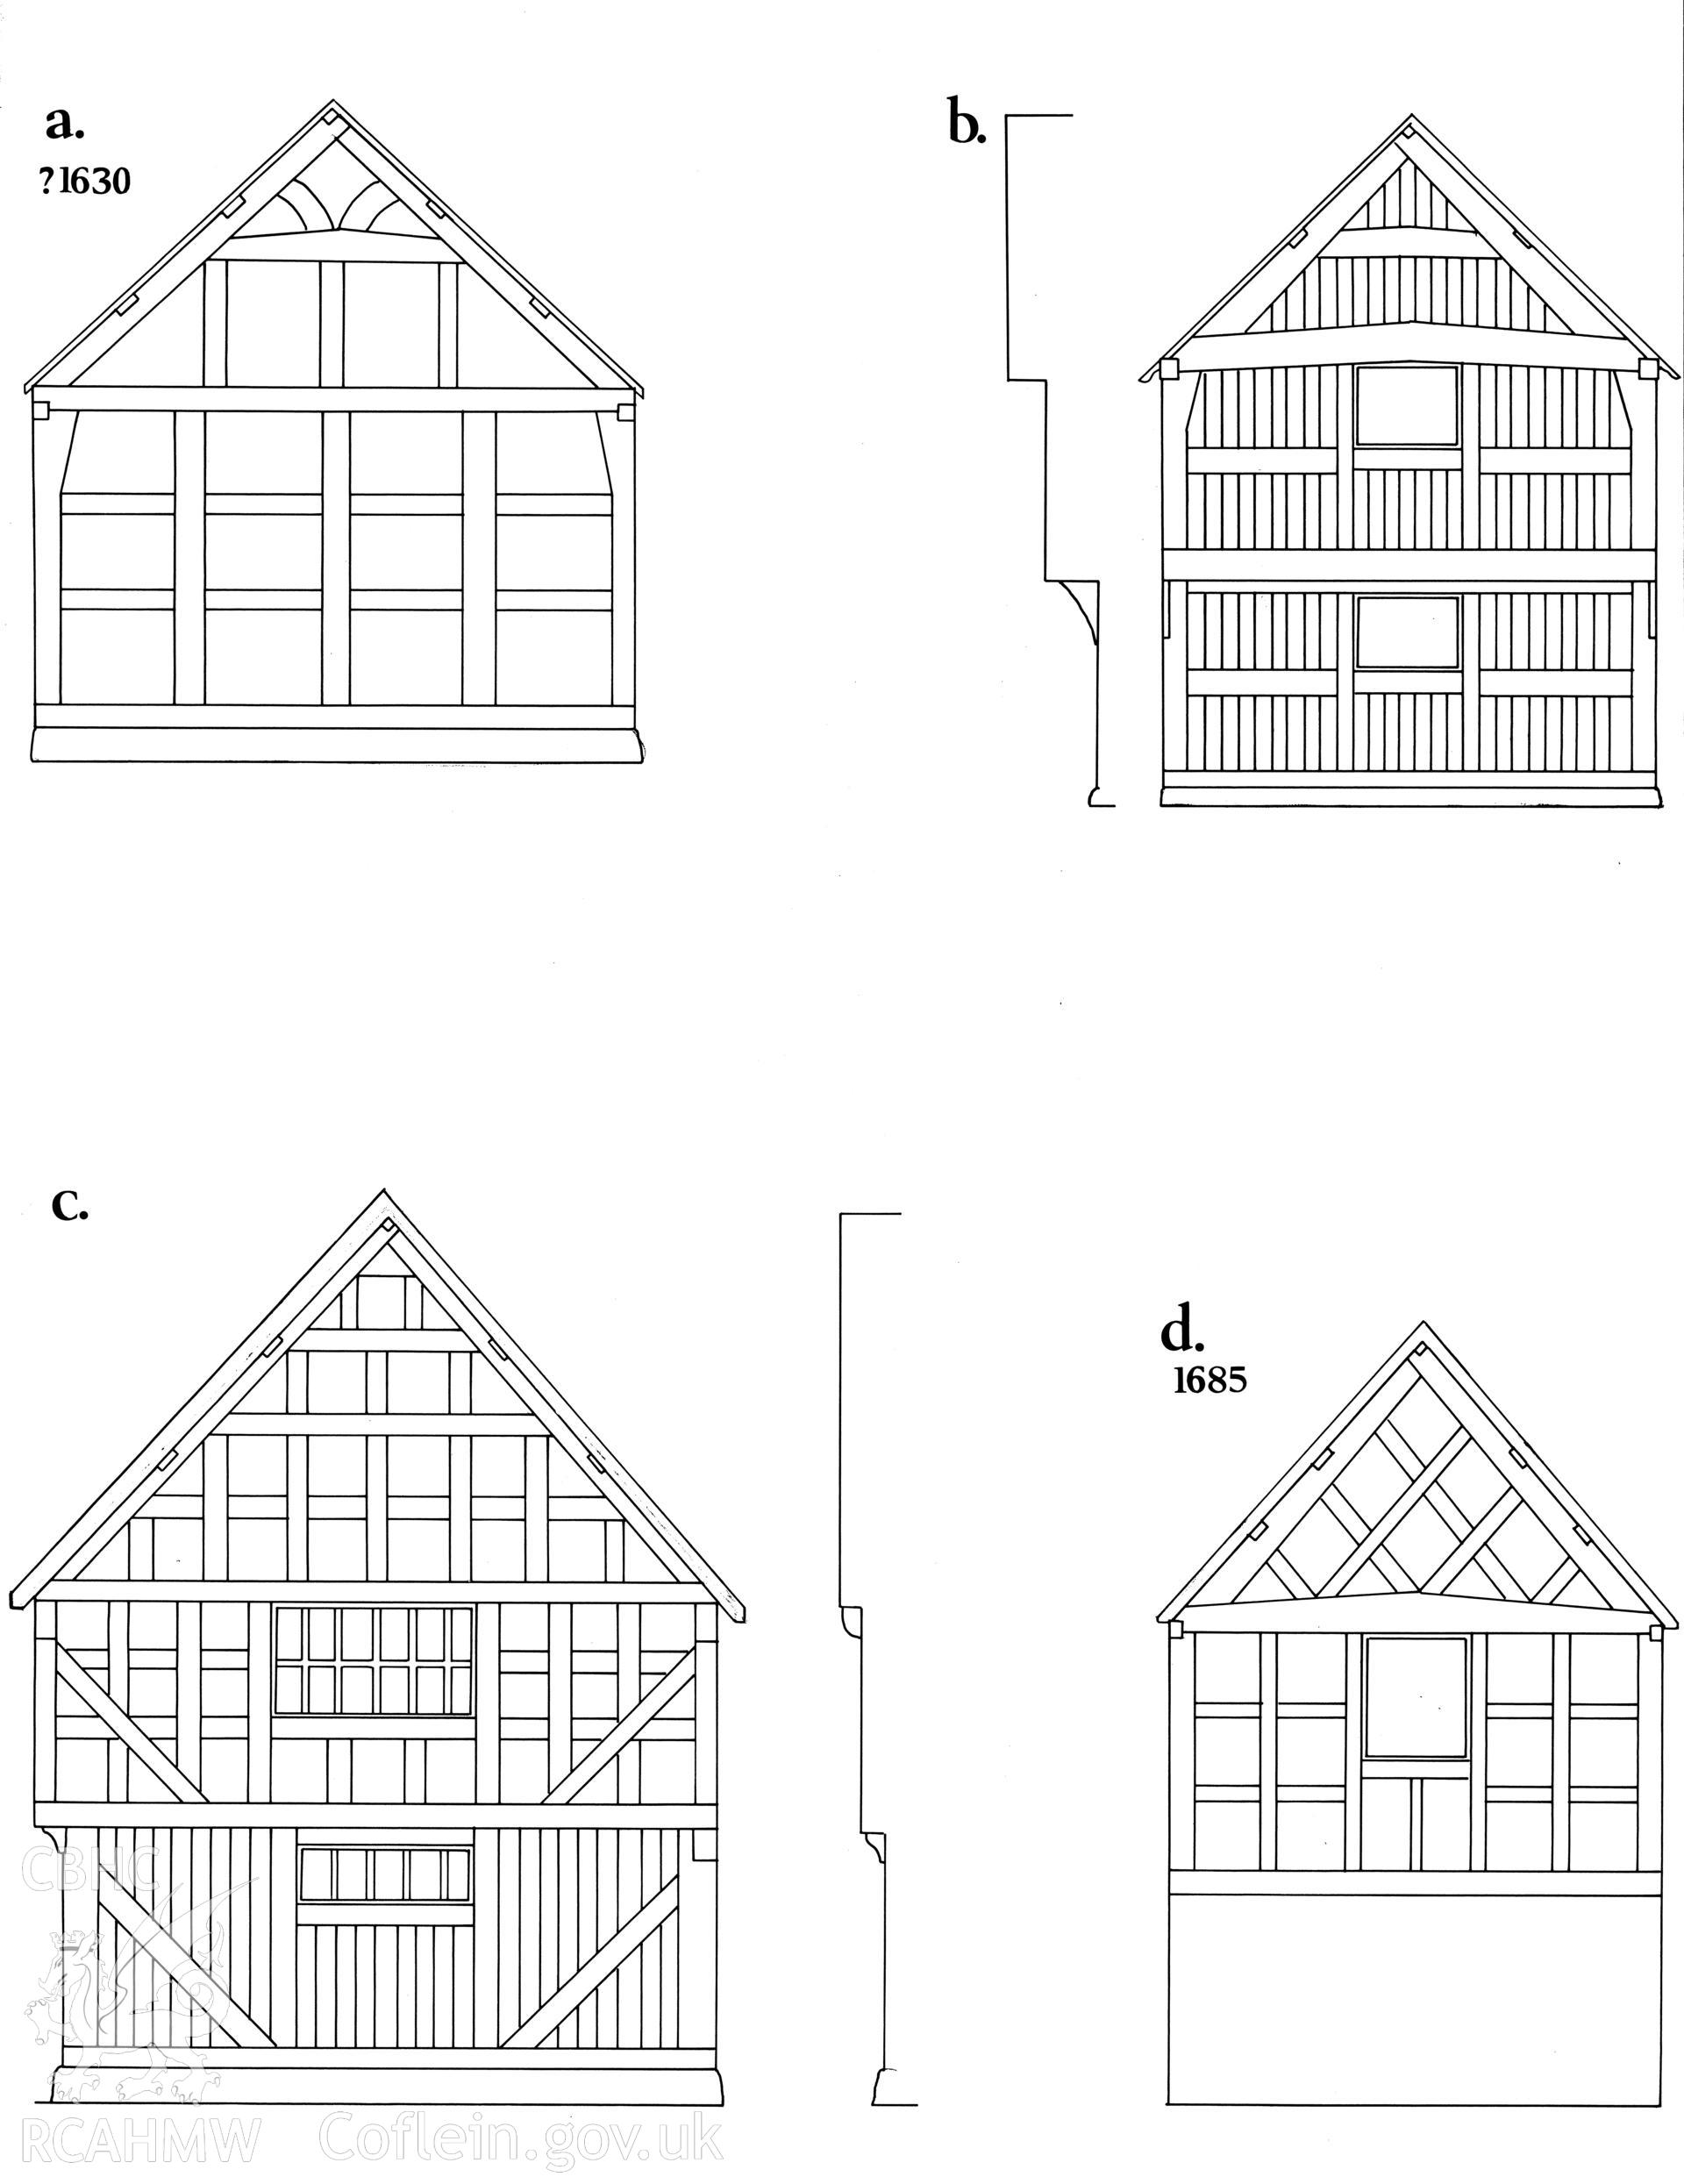 Multi site RCAHMW drawing, 4 sites, showing examples of ornate gable-ends on half-timbered houses.  Published in Houses of the Welsh Countryside, fig 177